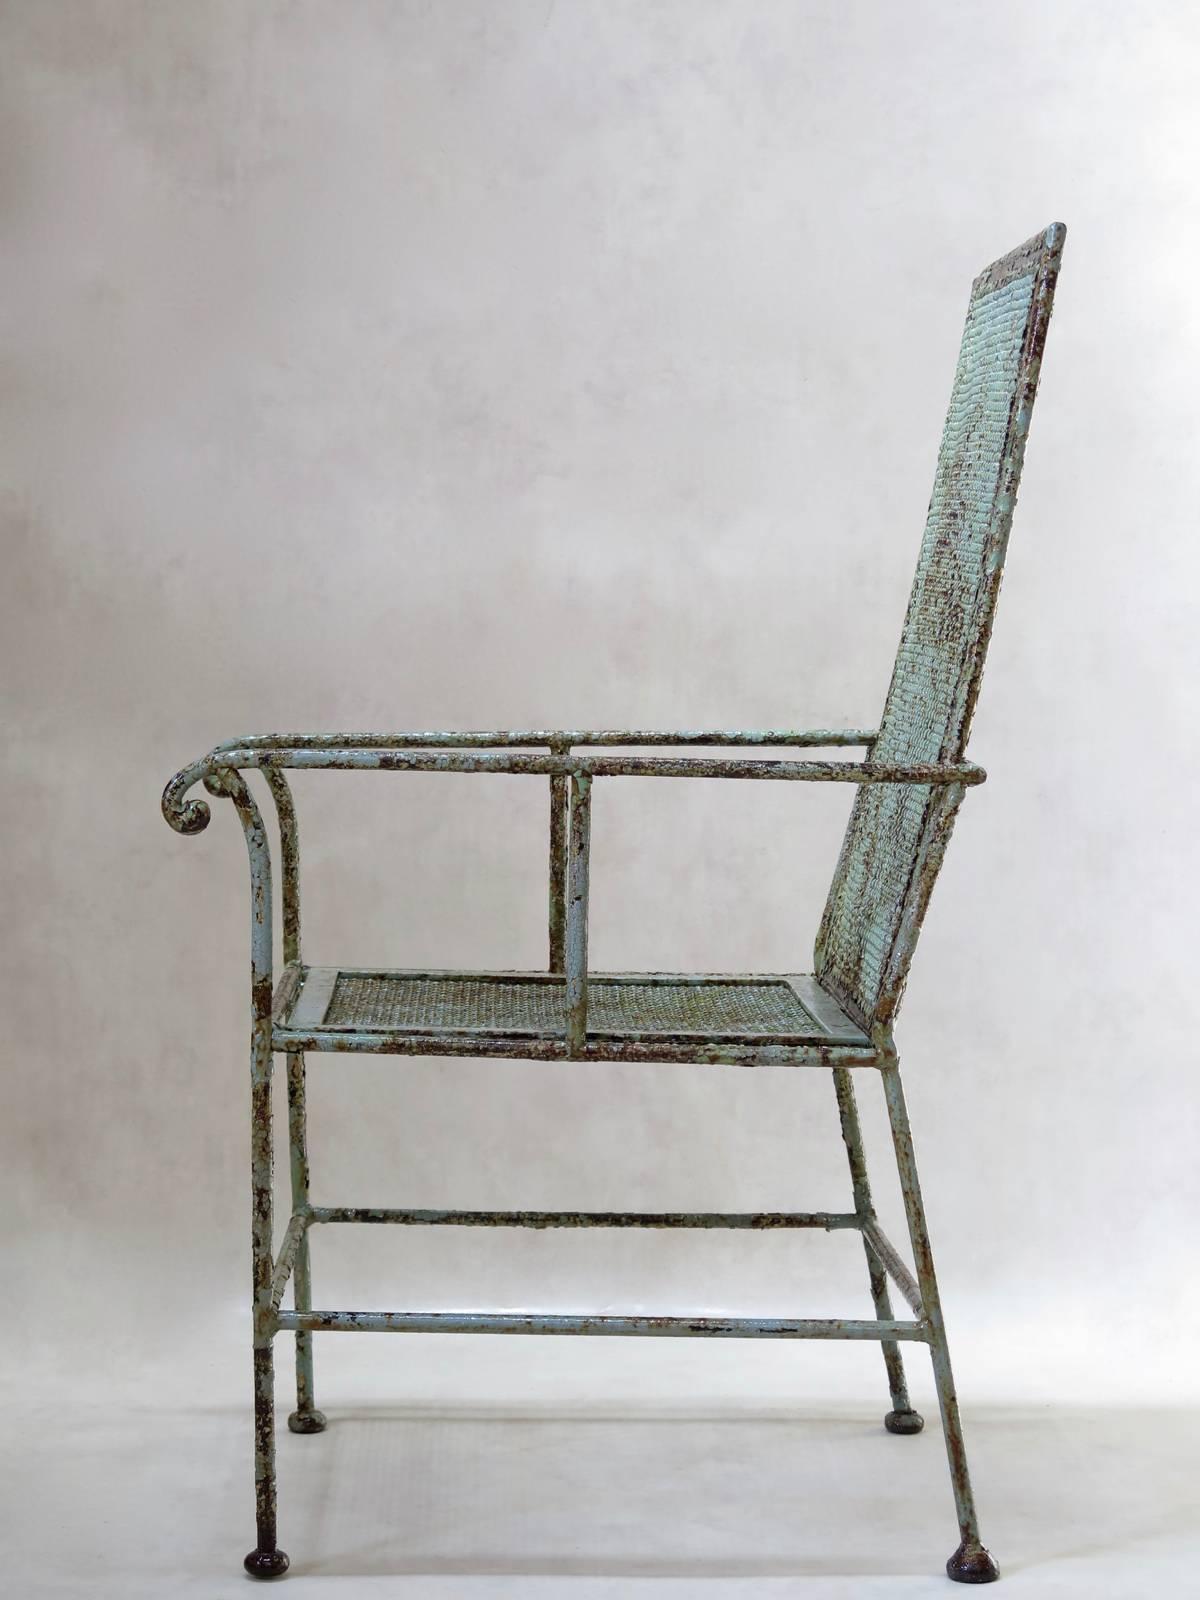 Beautiful wrought iron armchair of unusual, fairly geometric design, with its original lovely green paint. The slightly inclined back is made with an intricately-knit wire mesh, and the seat with a more loosely-knit wire mesh (and more recent, circa